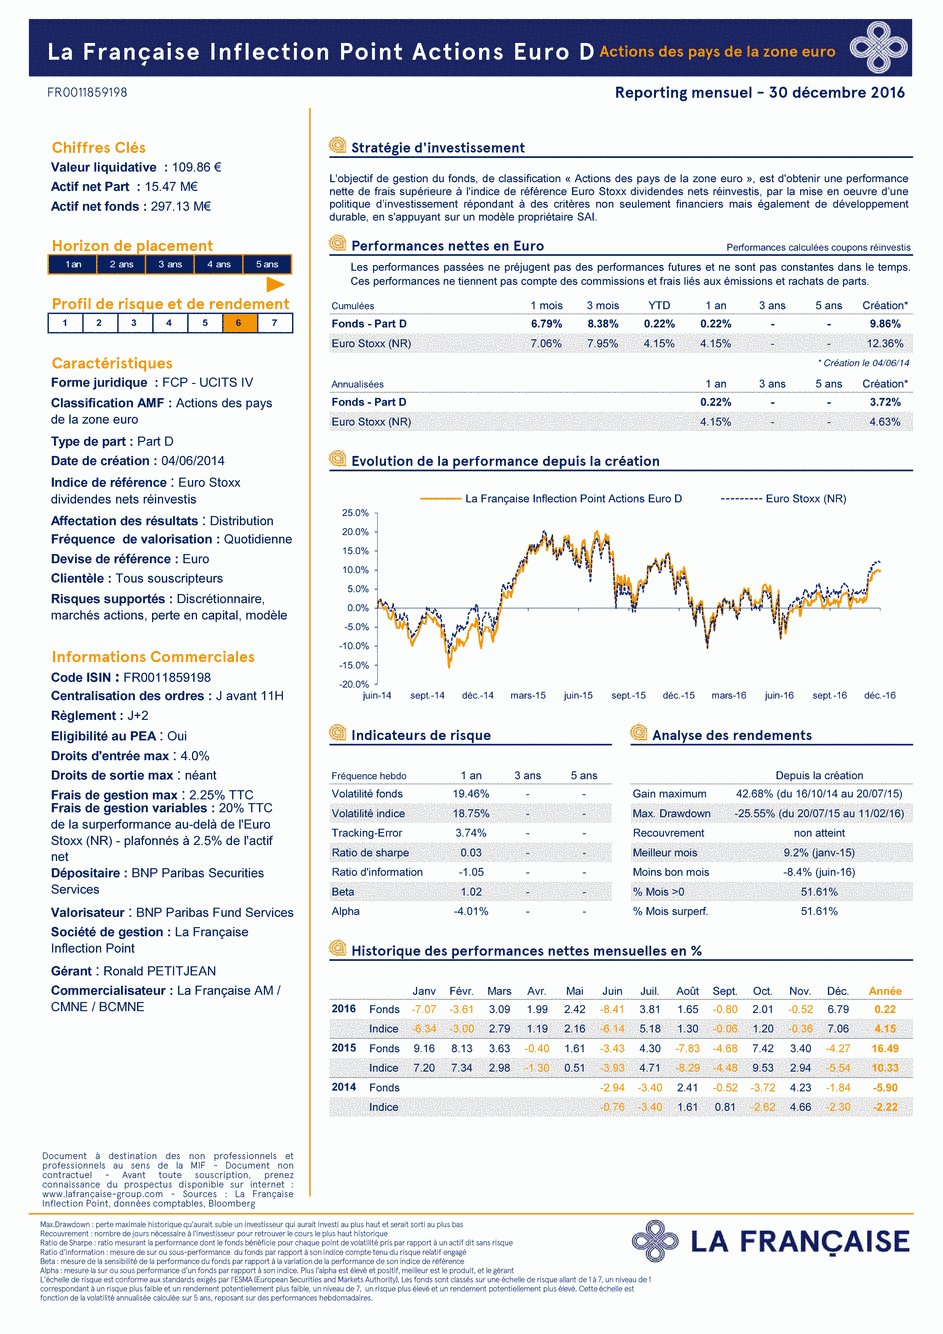 Reporting LA FRANÇAISE INFLECTION POINT ACTIONS EURO D - 30/12/2016 - French